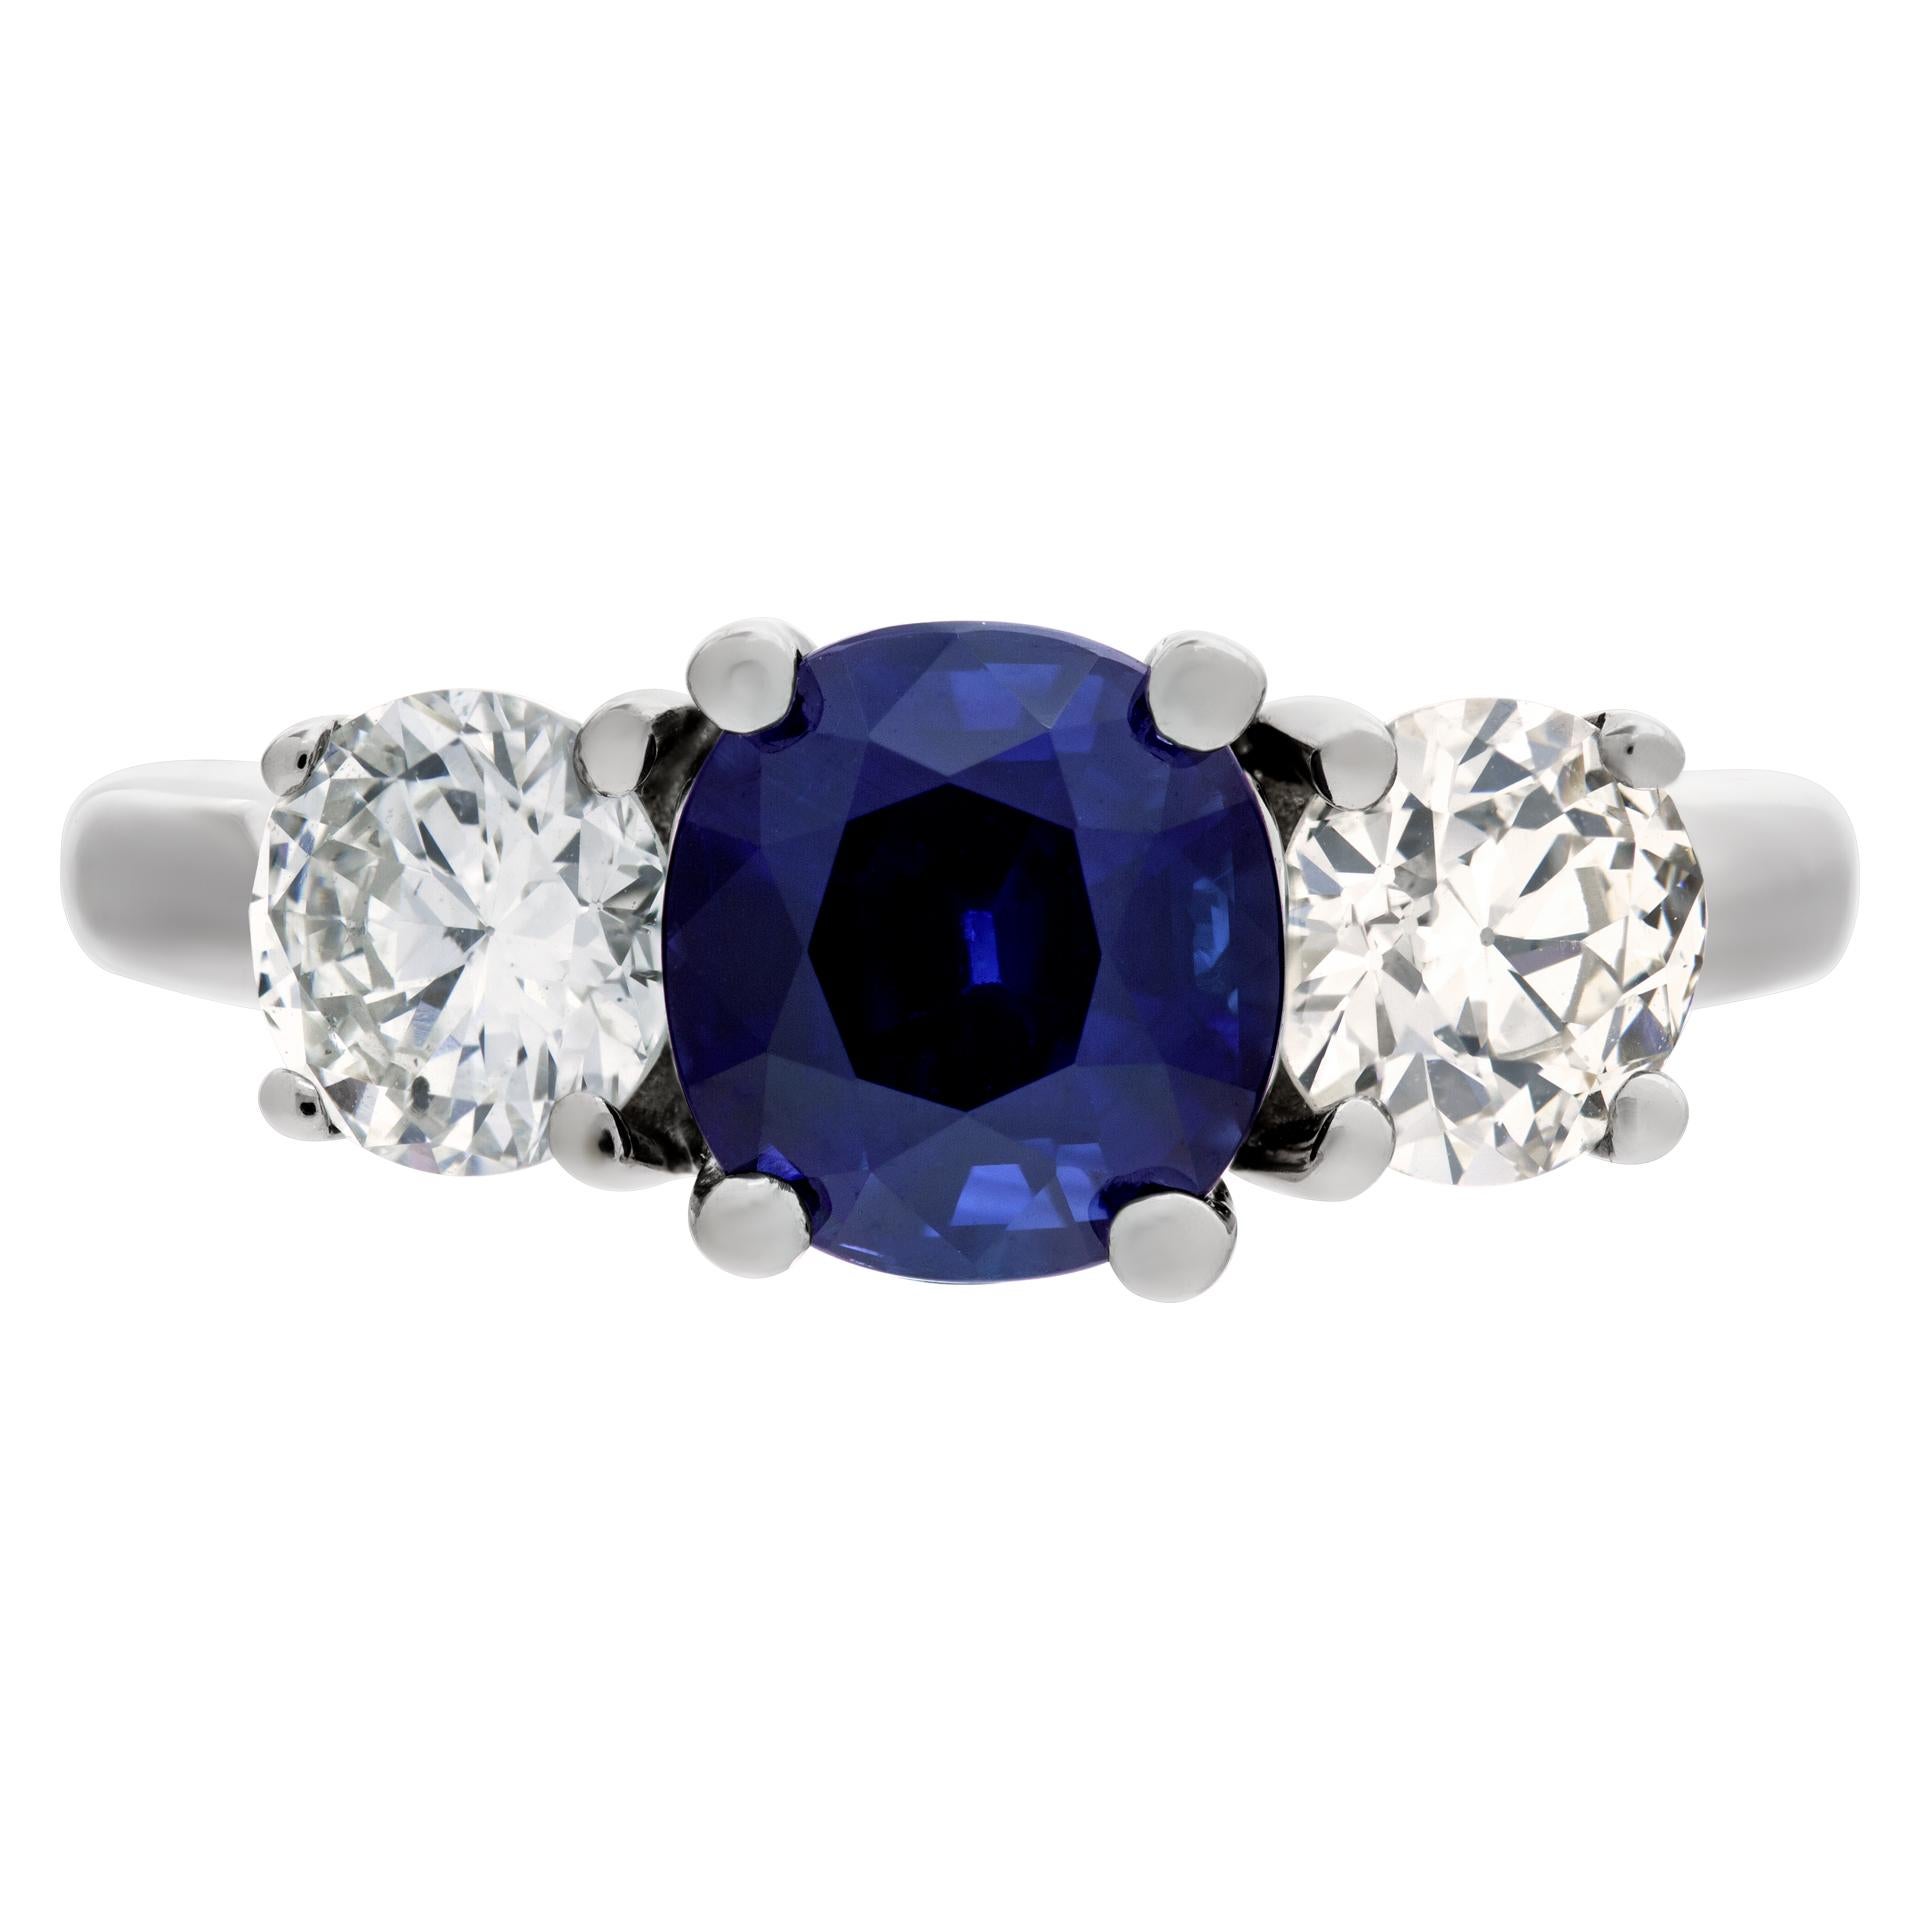 Sapphire & diamond ring in 14k white gold with 1.92 carat AGL certified unheated sapphire. Size 6 1/4 This Sapphire ring is currently size 6.25 and some items can be sized up or down, please ask! It weighs 2.6 pennyweights and is 14k White Gold.